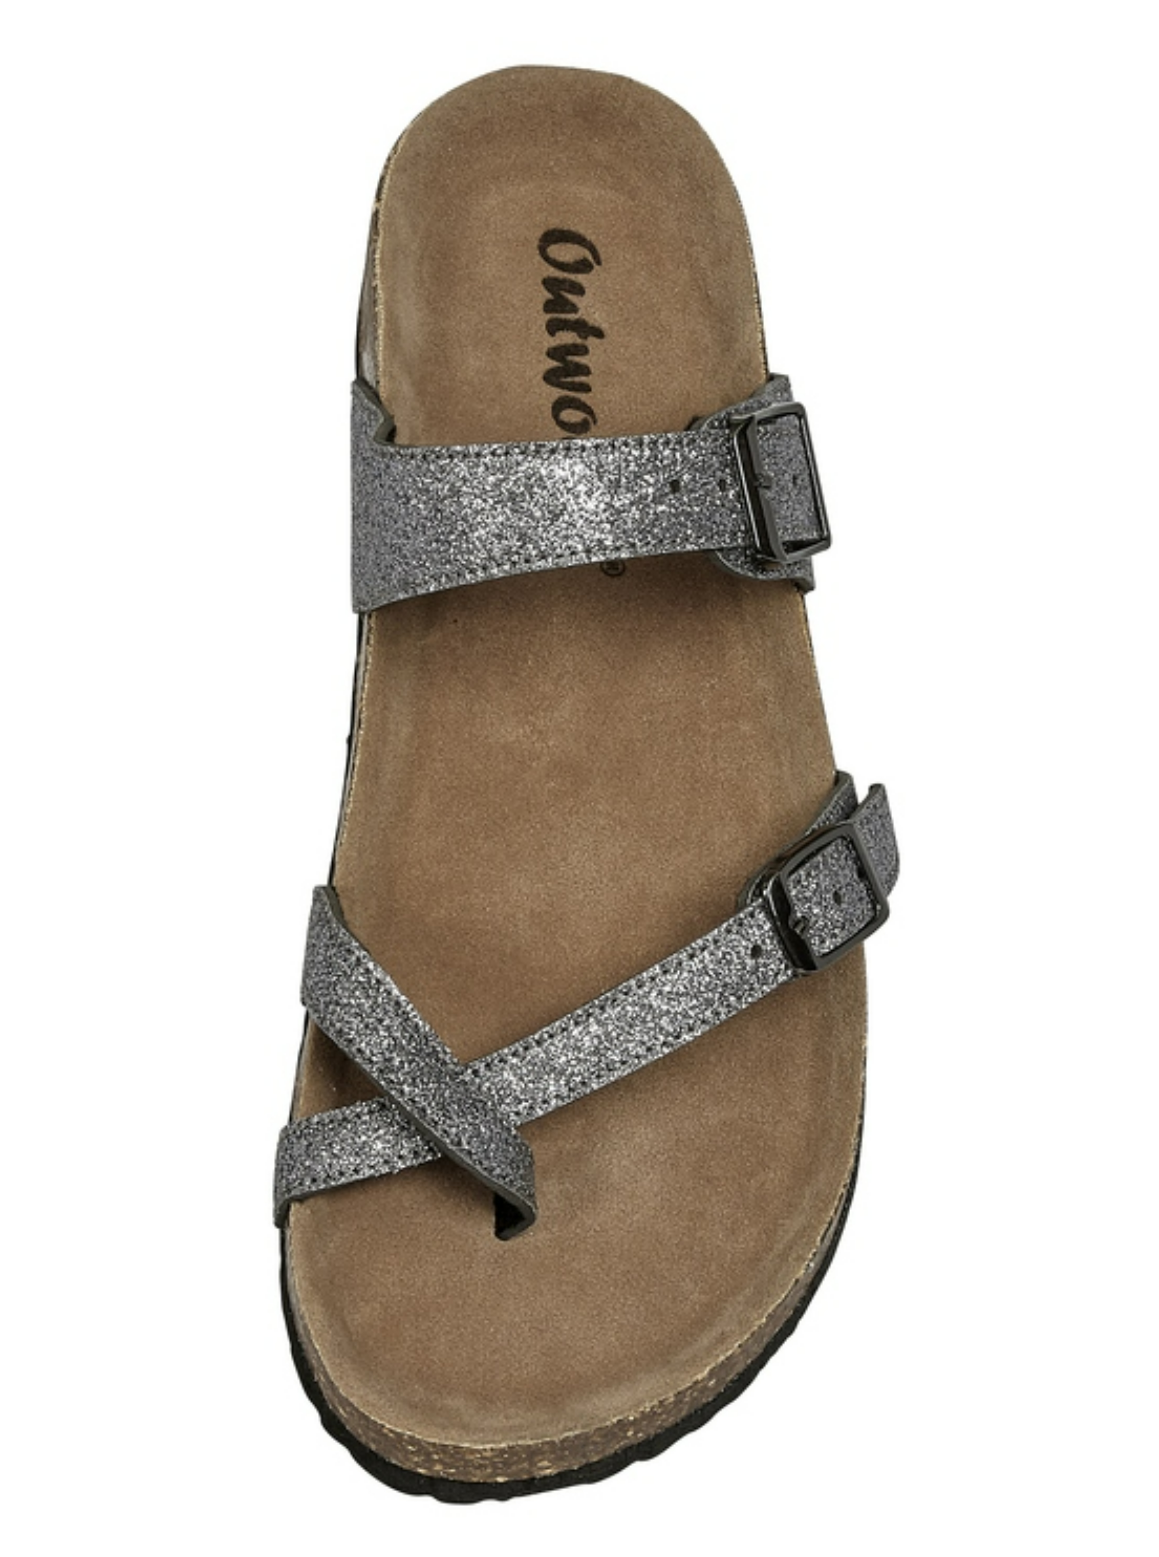 Outwood Bork Slip-on Sandal with Toe Strap in Pewter- Final Sale    Shoes Olem Shoe Corp- Tilden Co.